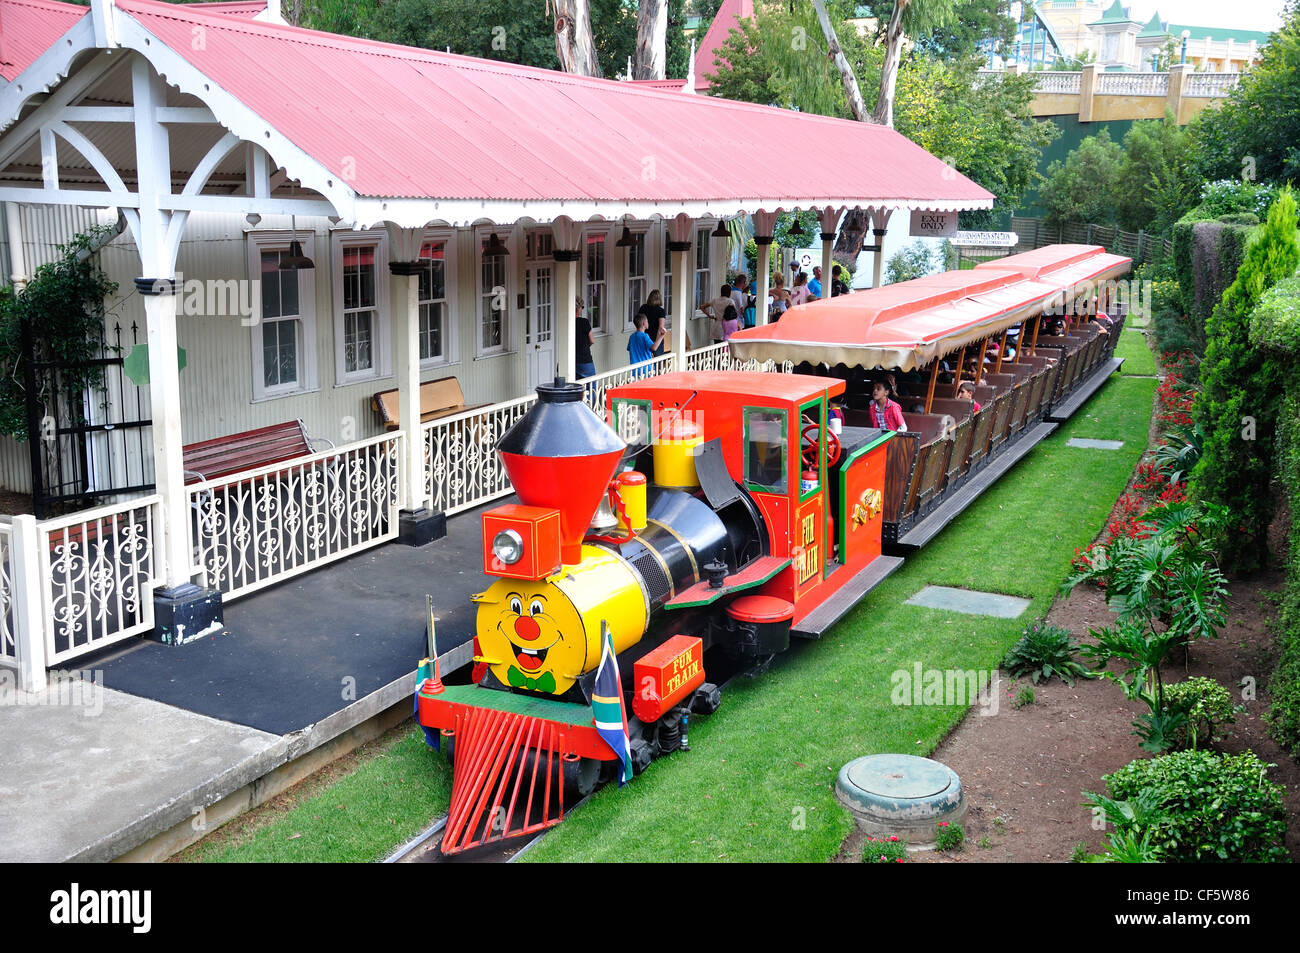 The 'Fun Train' at station, Gold Reef City Theme Park, Johannesburg, Gauteng Province, South Africa Stock Photo